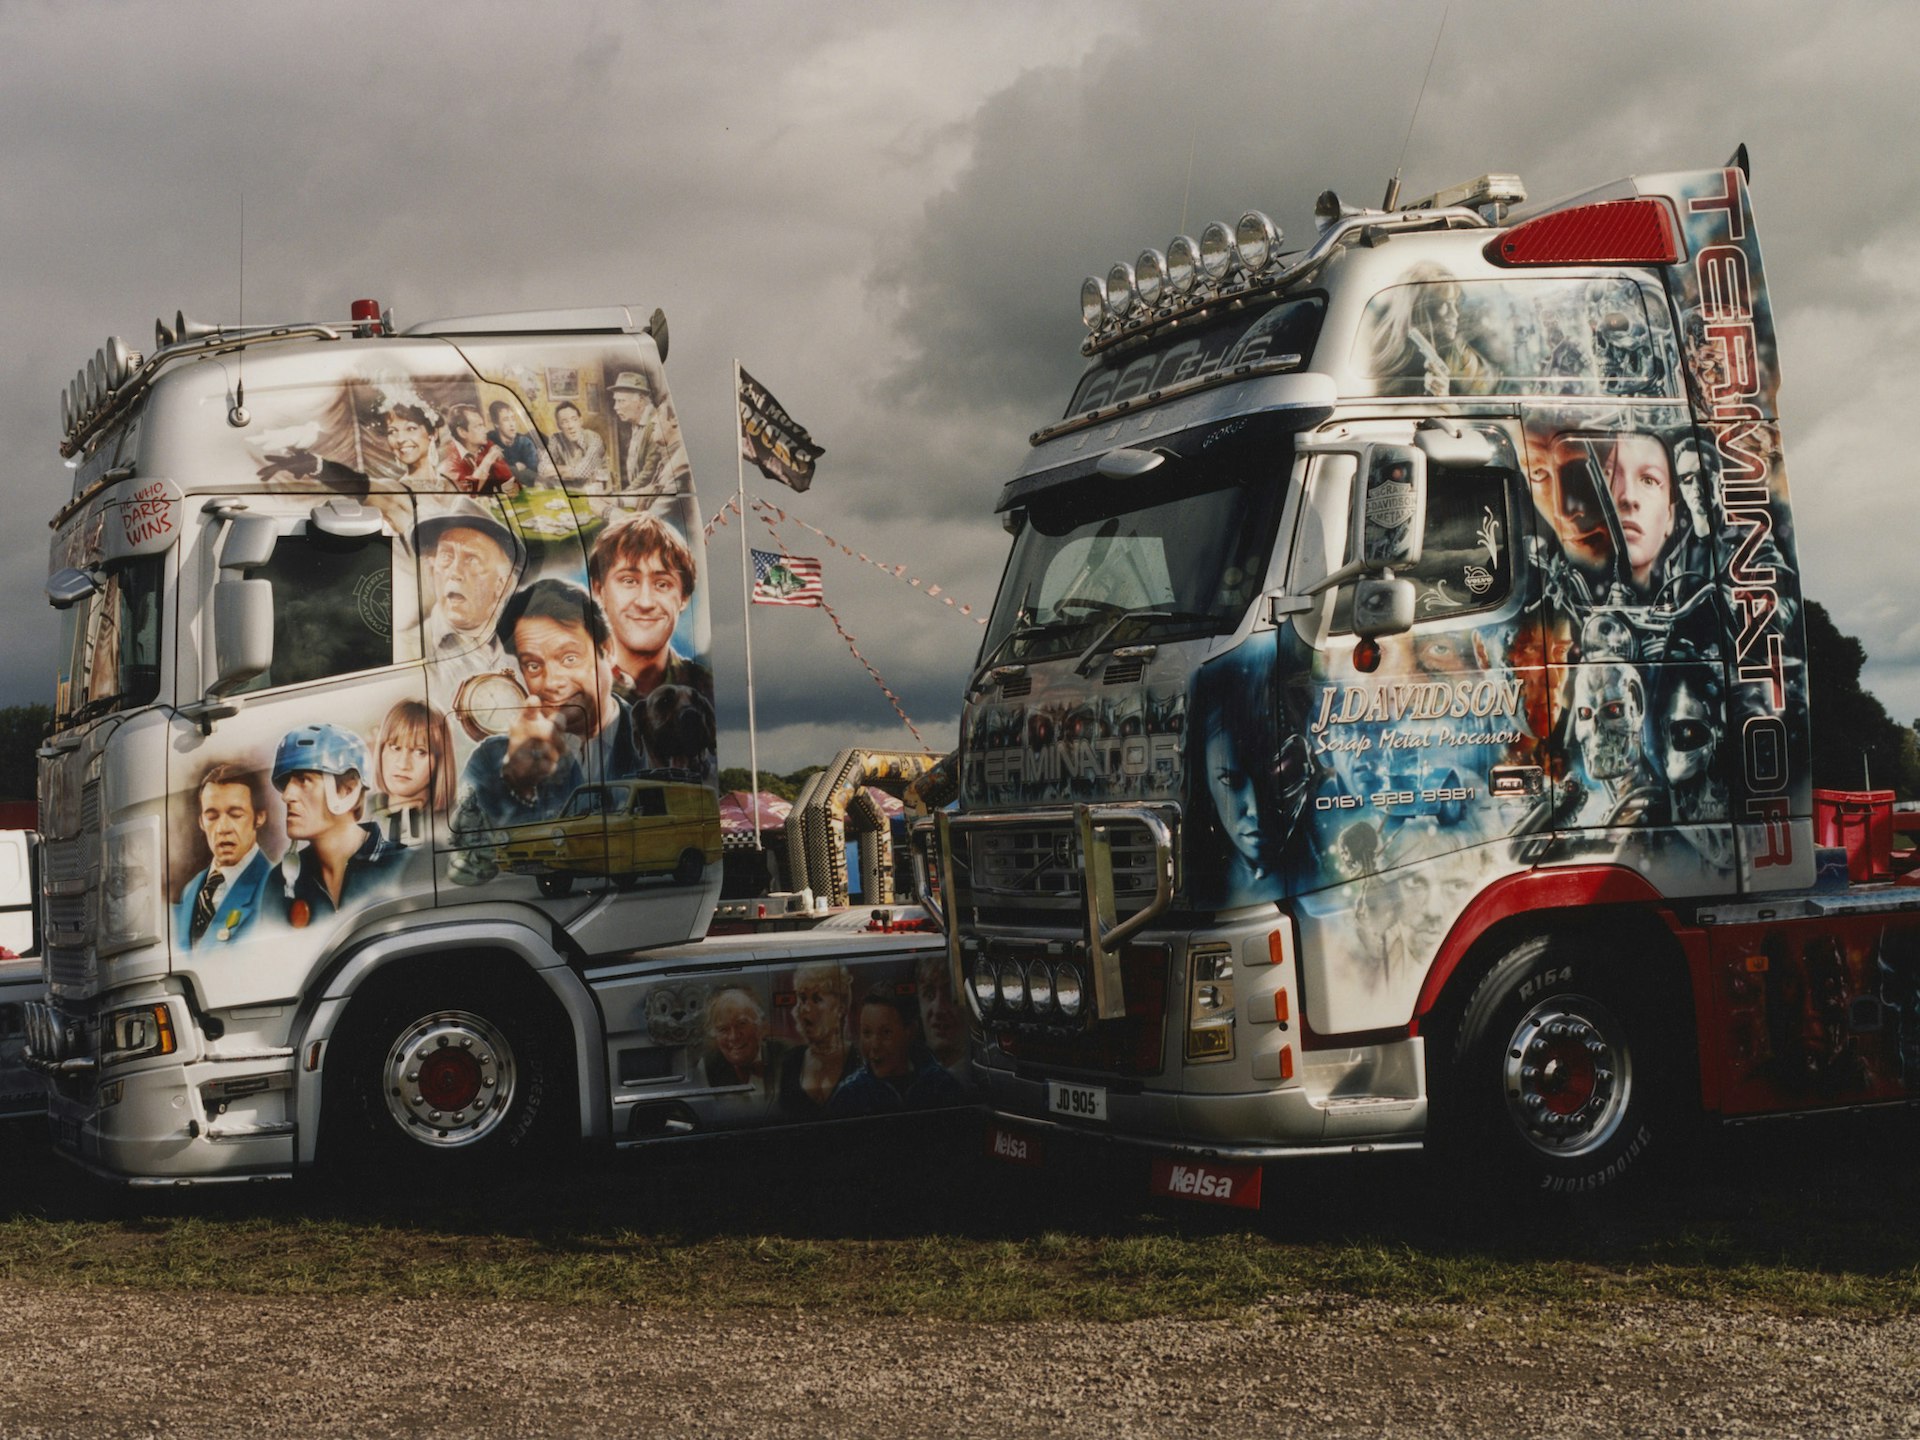 Photos capturing the UK’s airbrushed truck scene